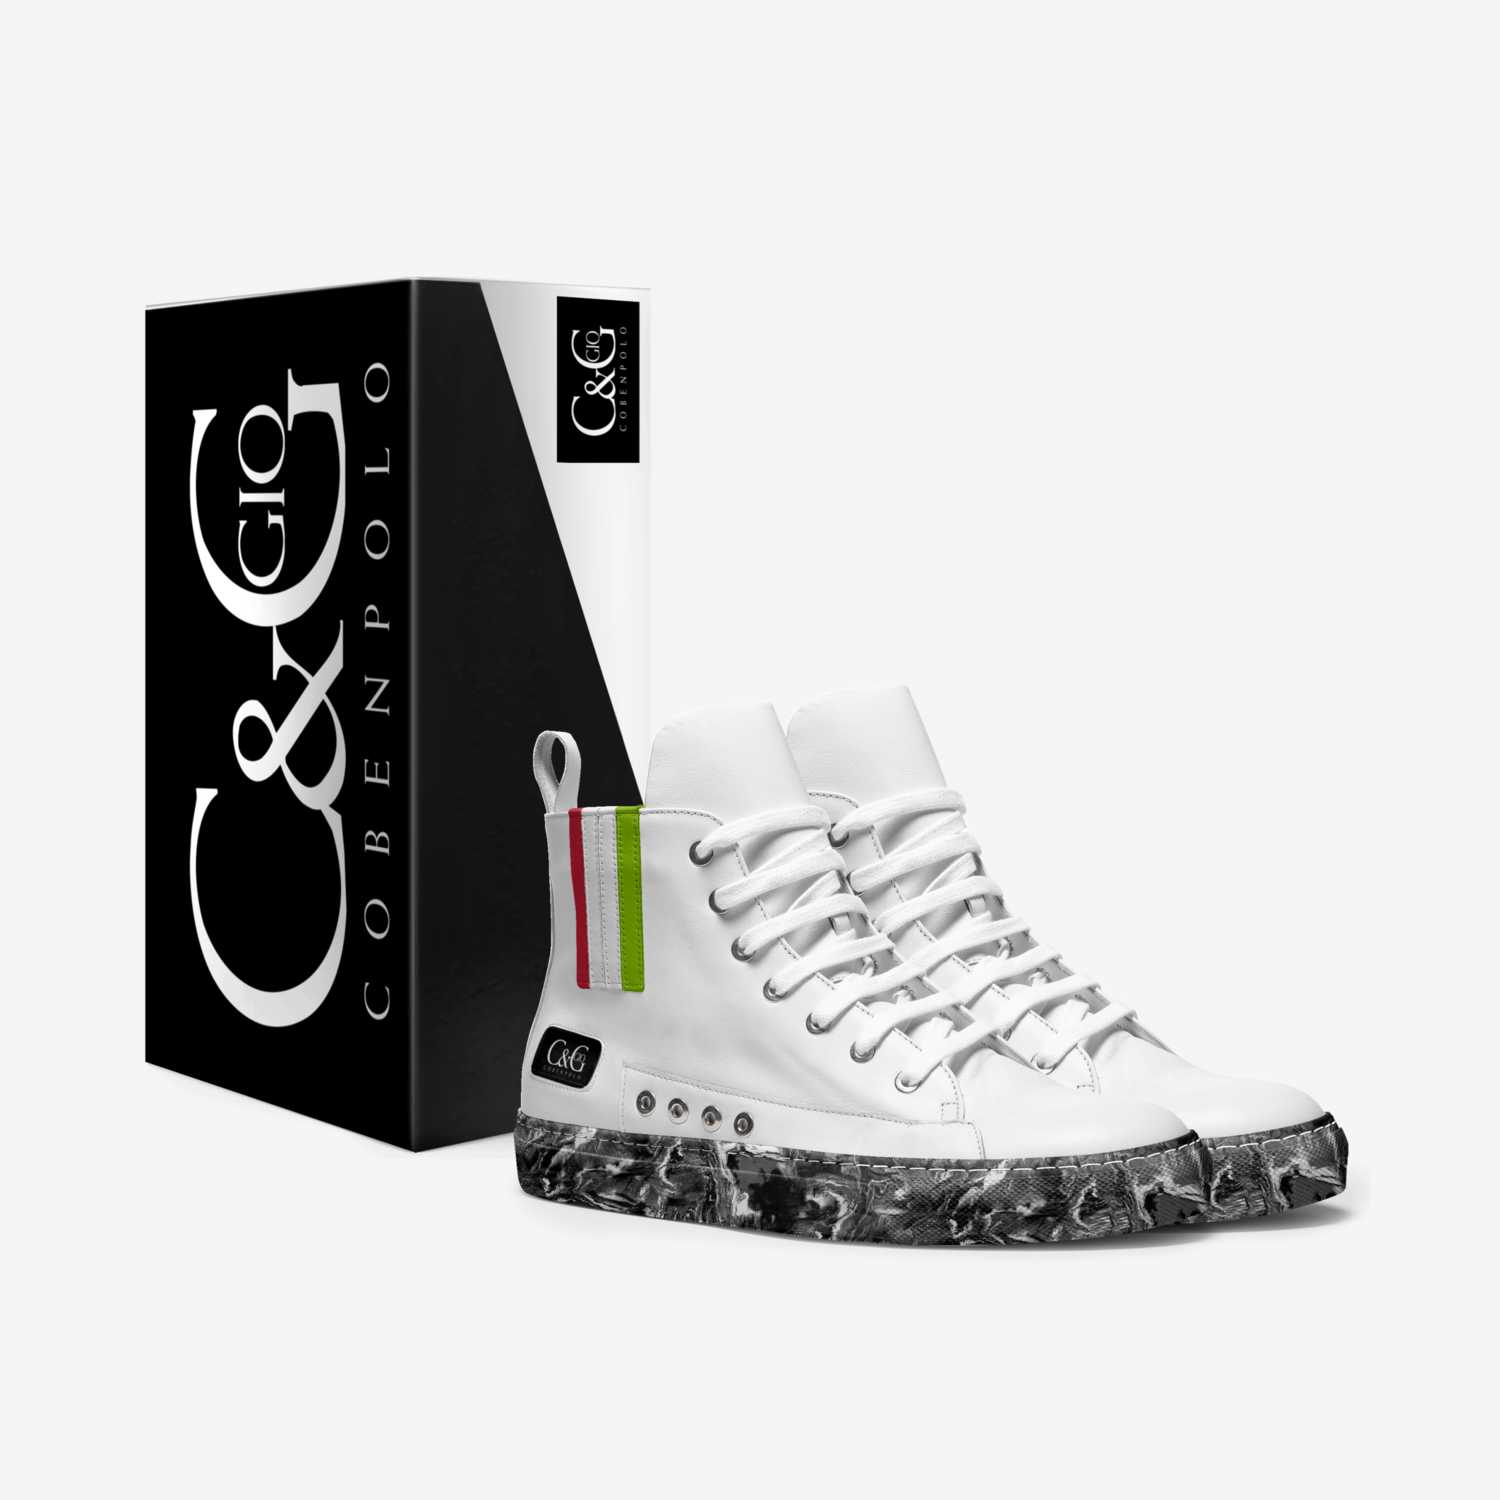 C&G custom made in Italy shoes by Cobenpolo Costa | Box view